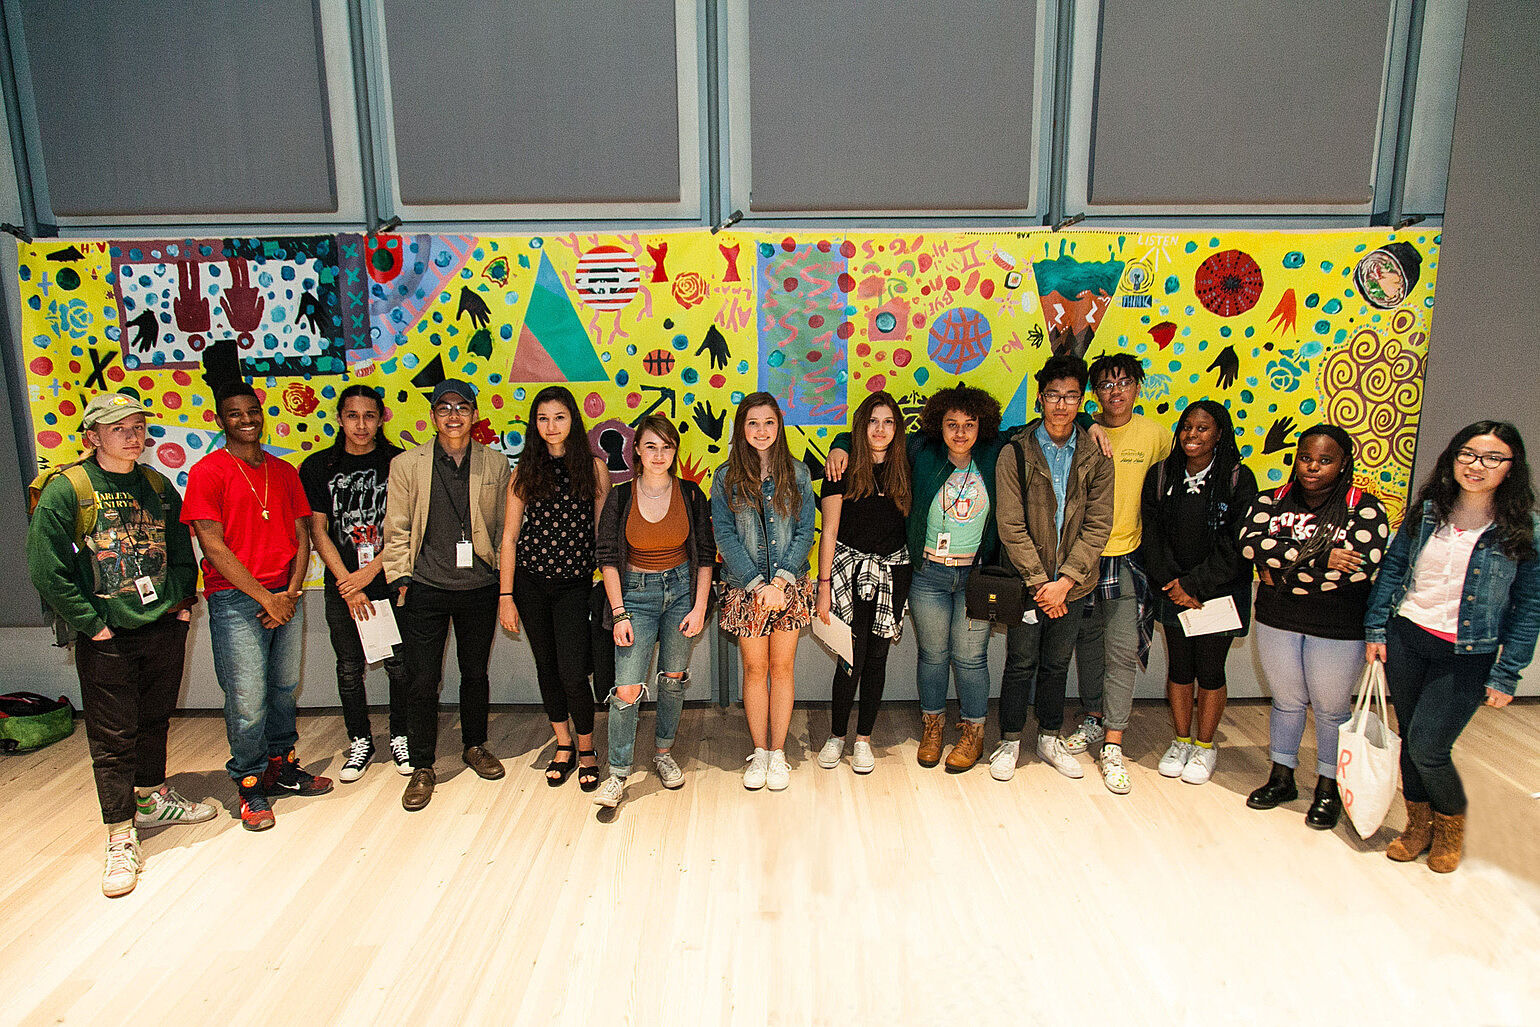 YI Artists pose with collaborative painting made with artist Nina Chanel Abney. Photograph by Andrew Kist.